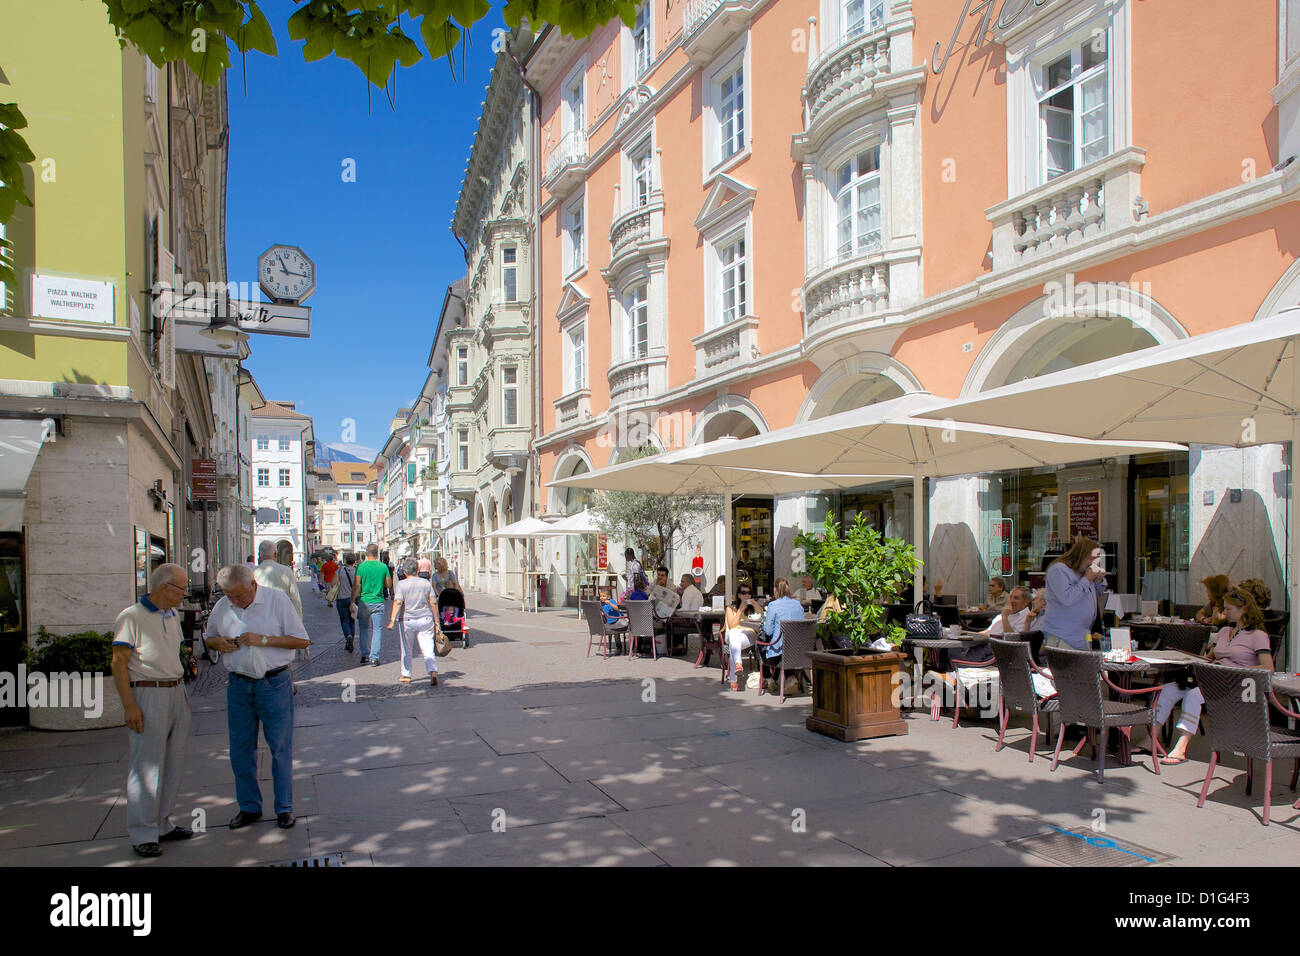 Bolzano High Resolution Stock Photography and Images - Alamy